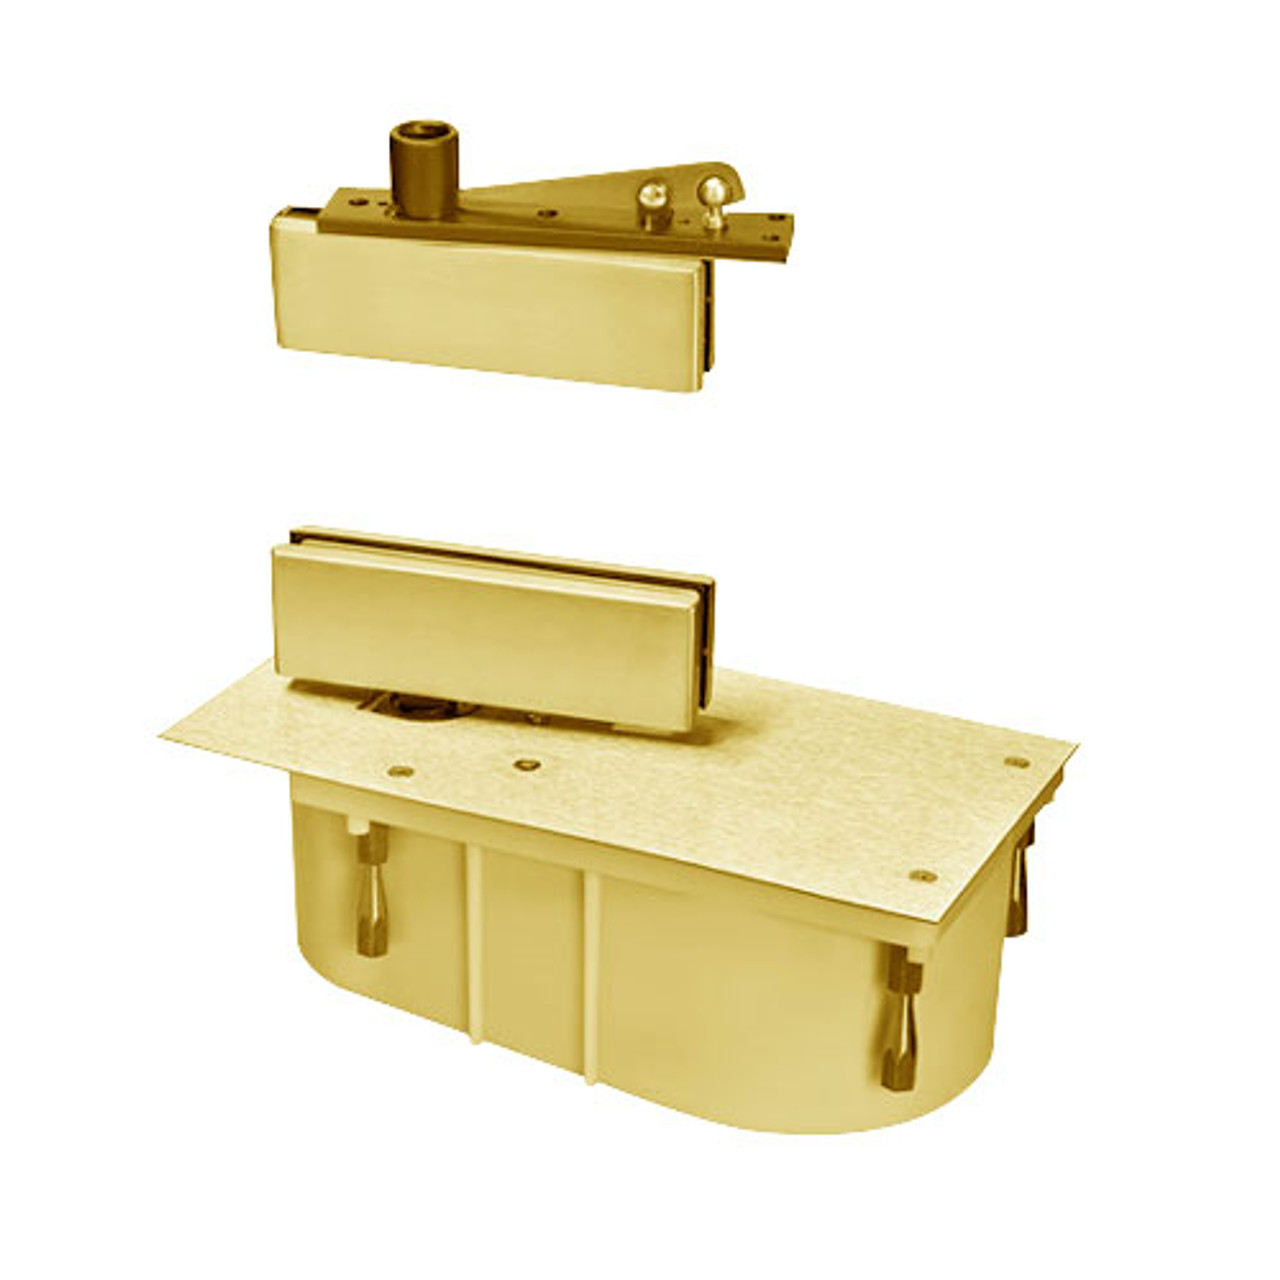 428-90S-LTP-RH-605 Rixson 428 Series Heavy Duty Single Acting Center Hung Floor Closer with Patch Fittings in Bright Brass Finish